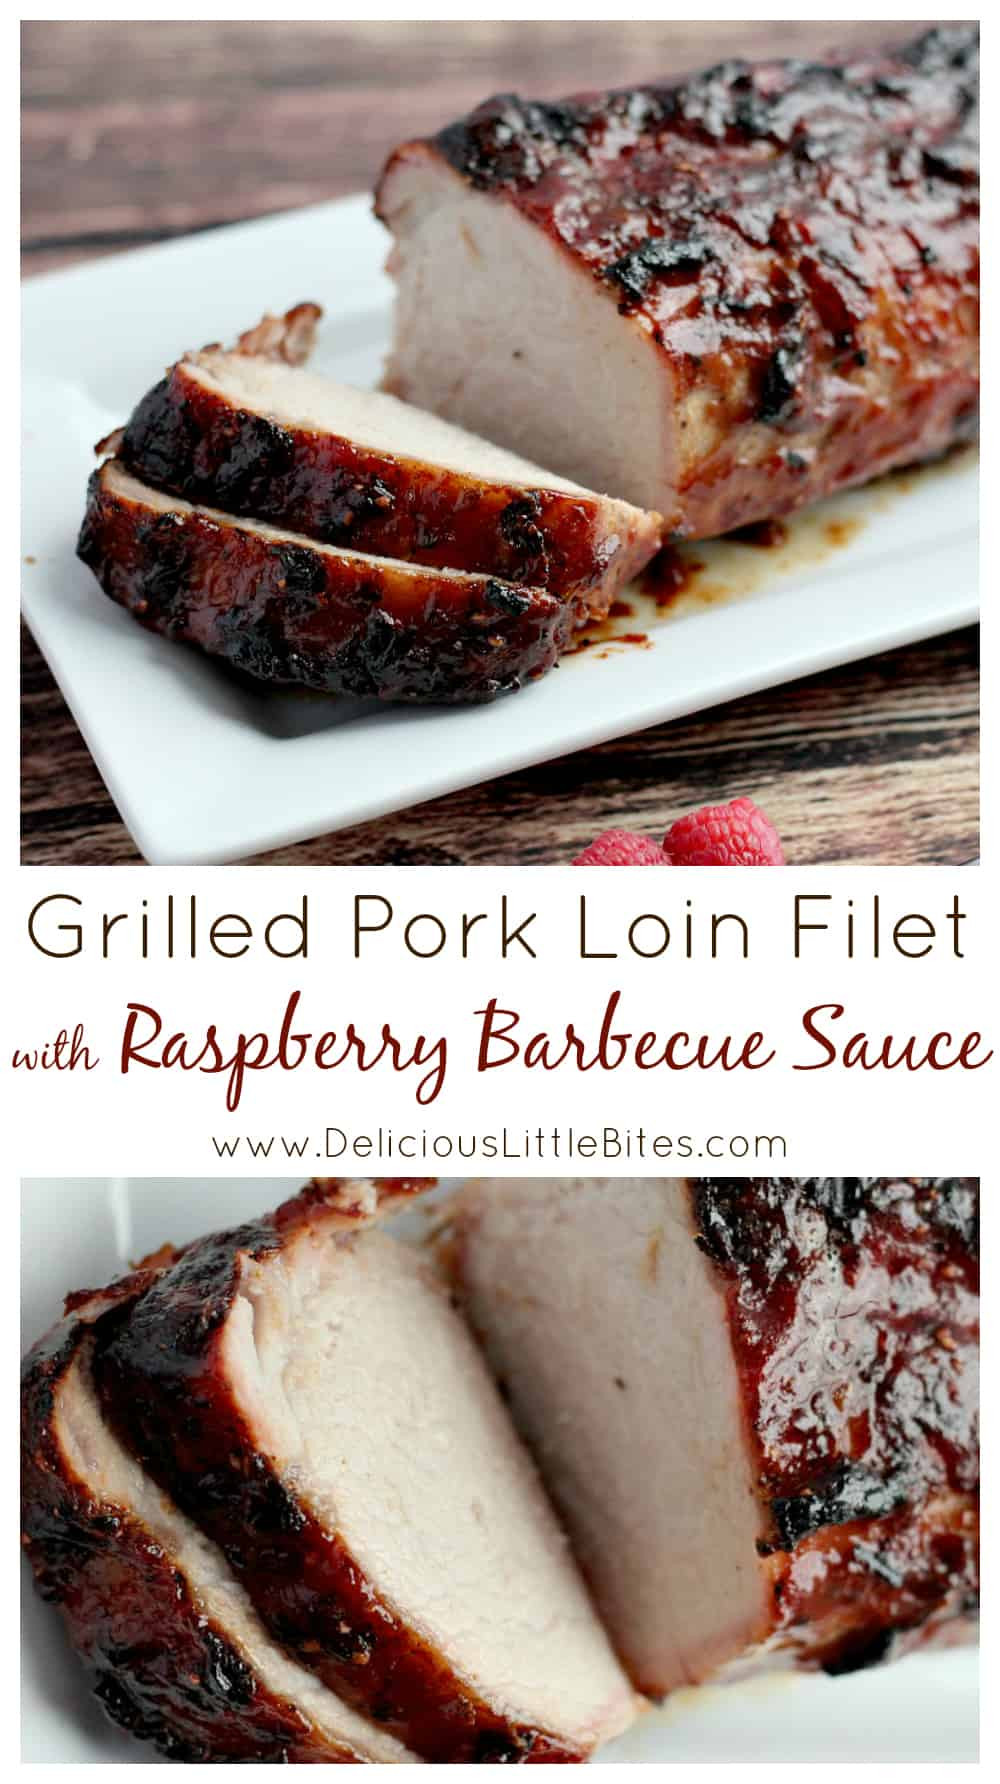 Pork Loin Filet
 Grilled Pork Loin Filet with Raspberry Barbecue Sauce